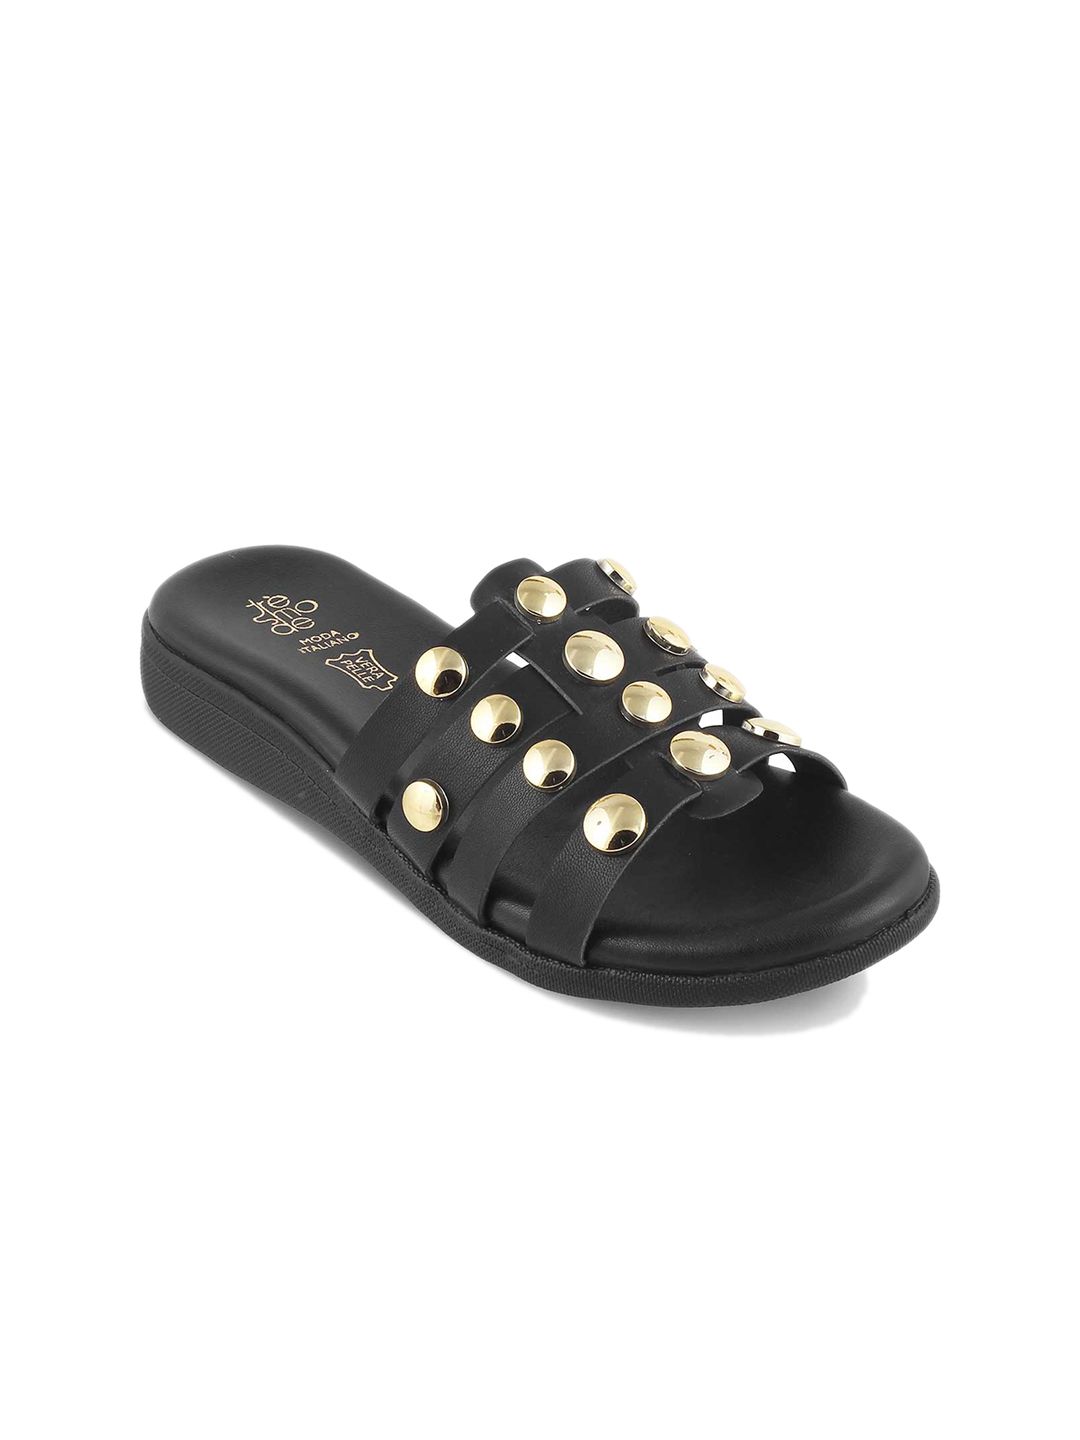 Tresmode Embellished Open Toe Flats Price in India